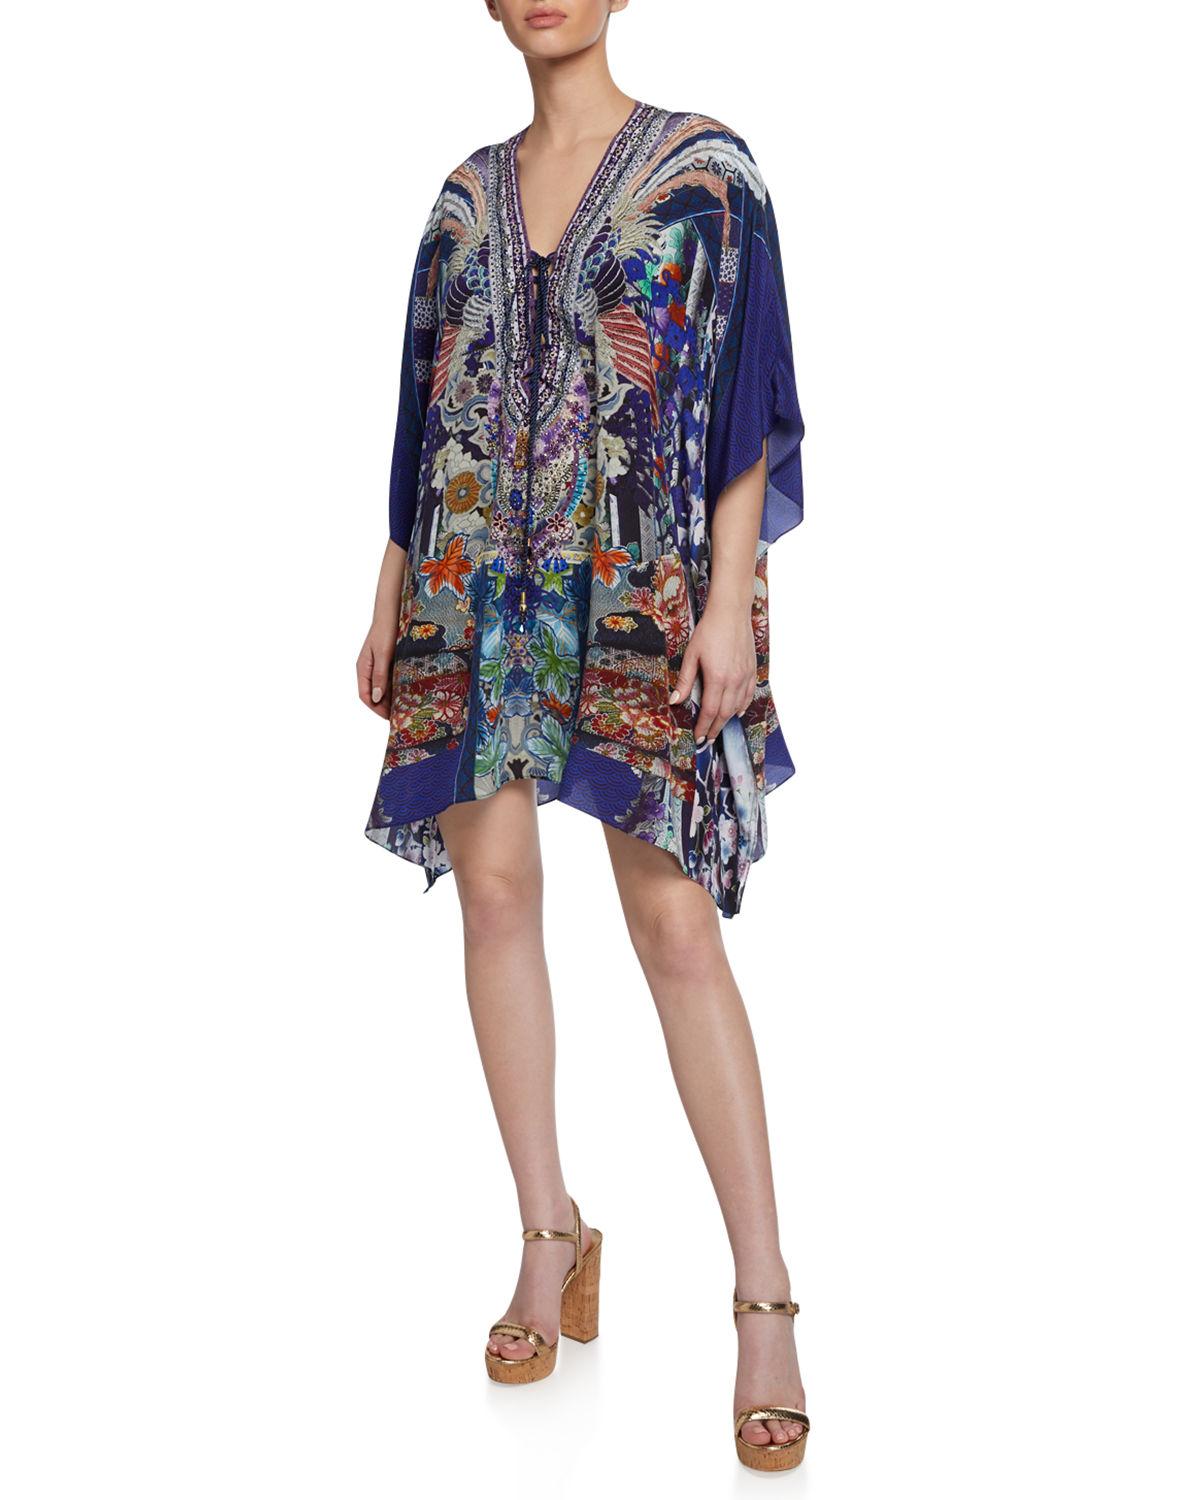 Lyst - Camilla Printed Embellished Lace-up Short Coverup Kaftan in Blue